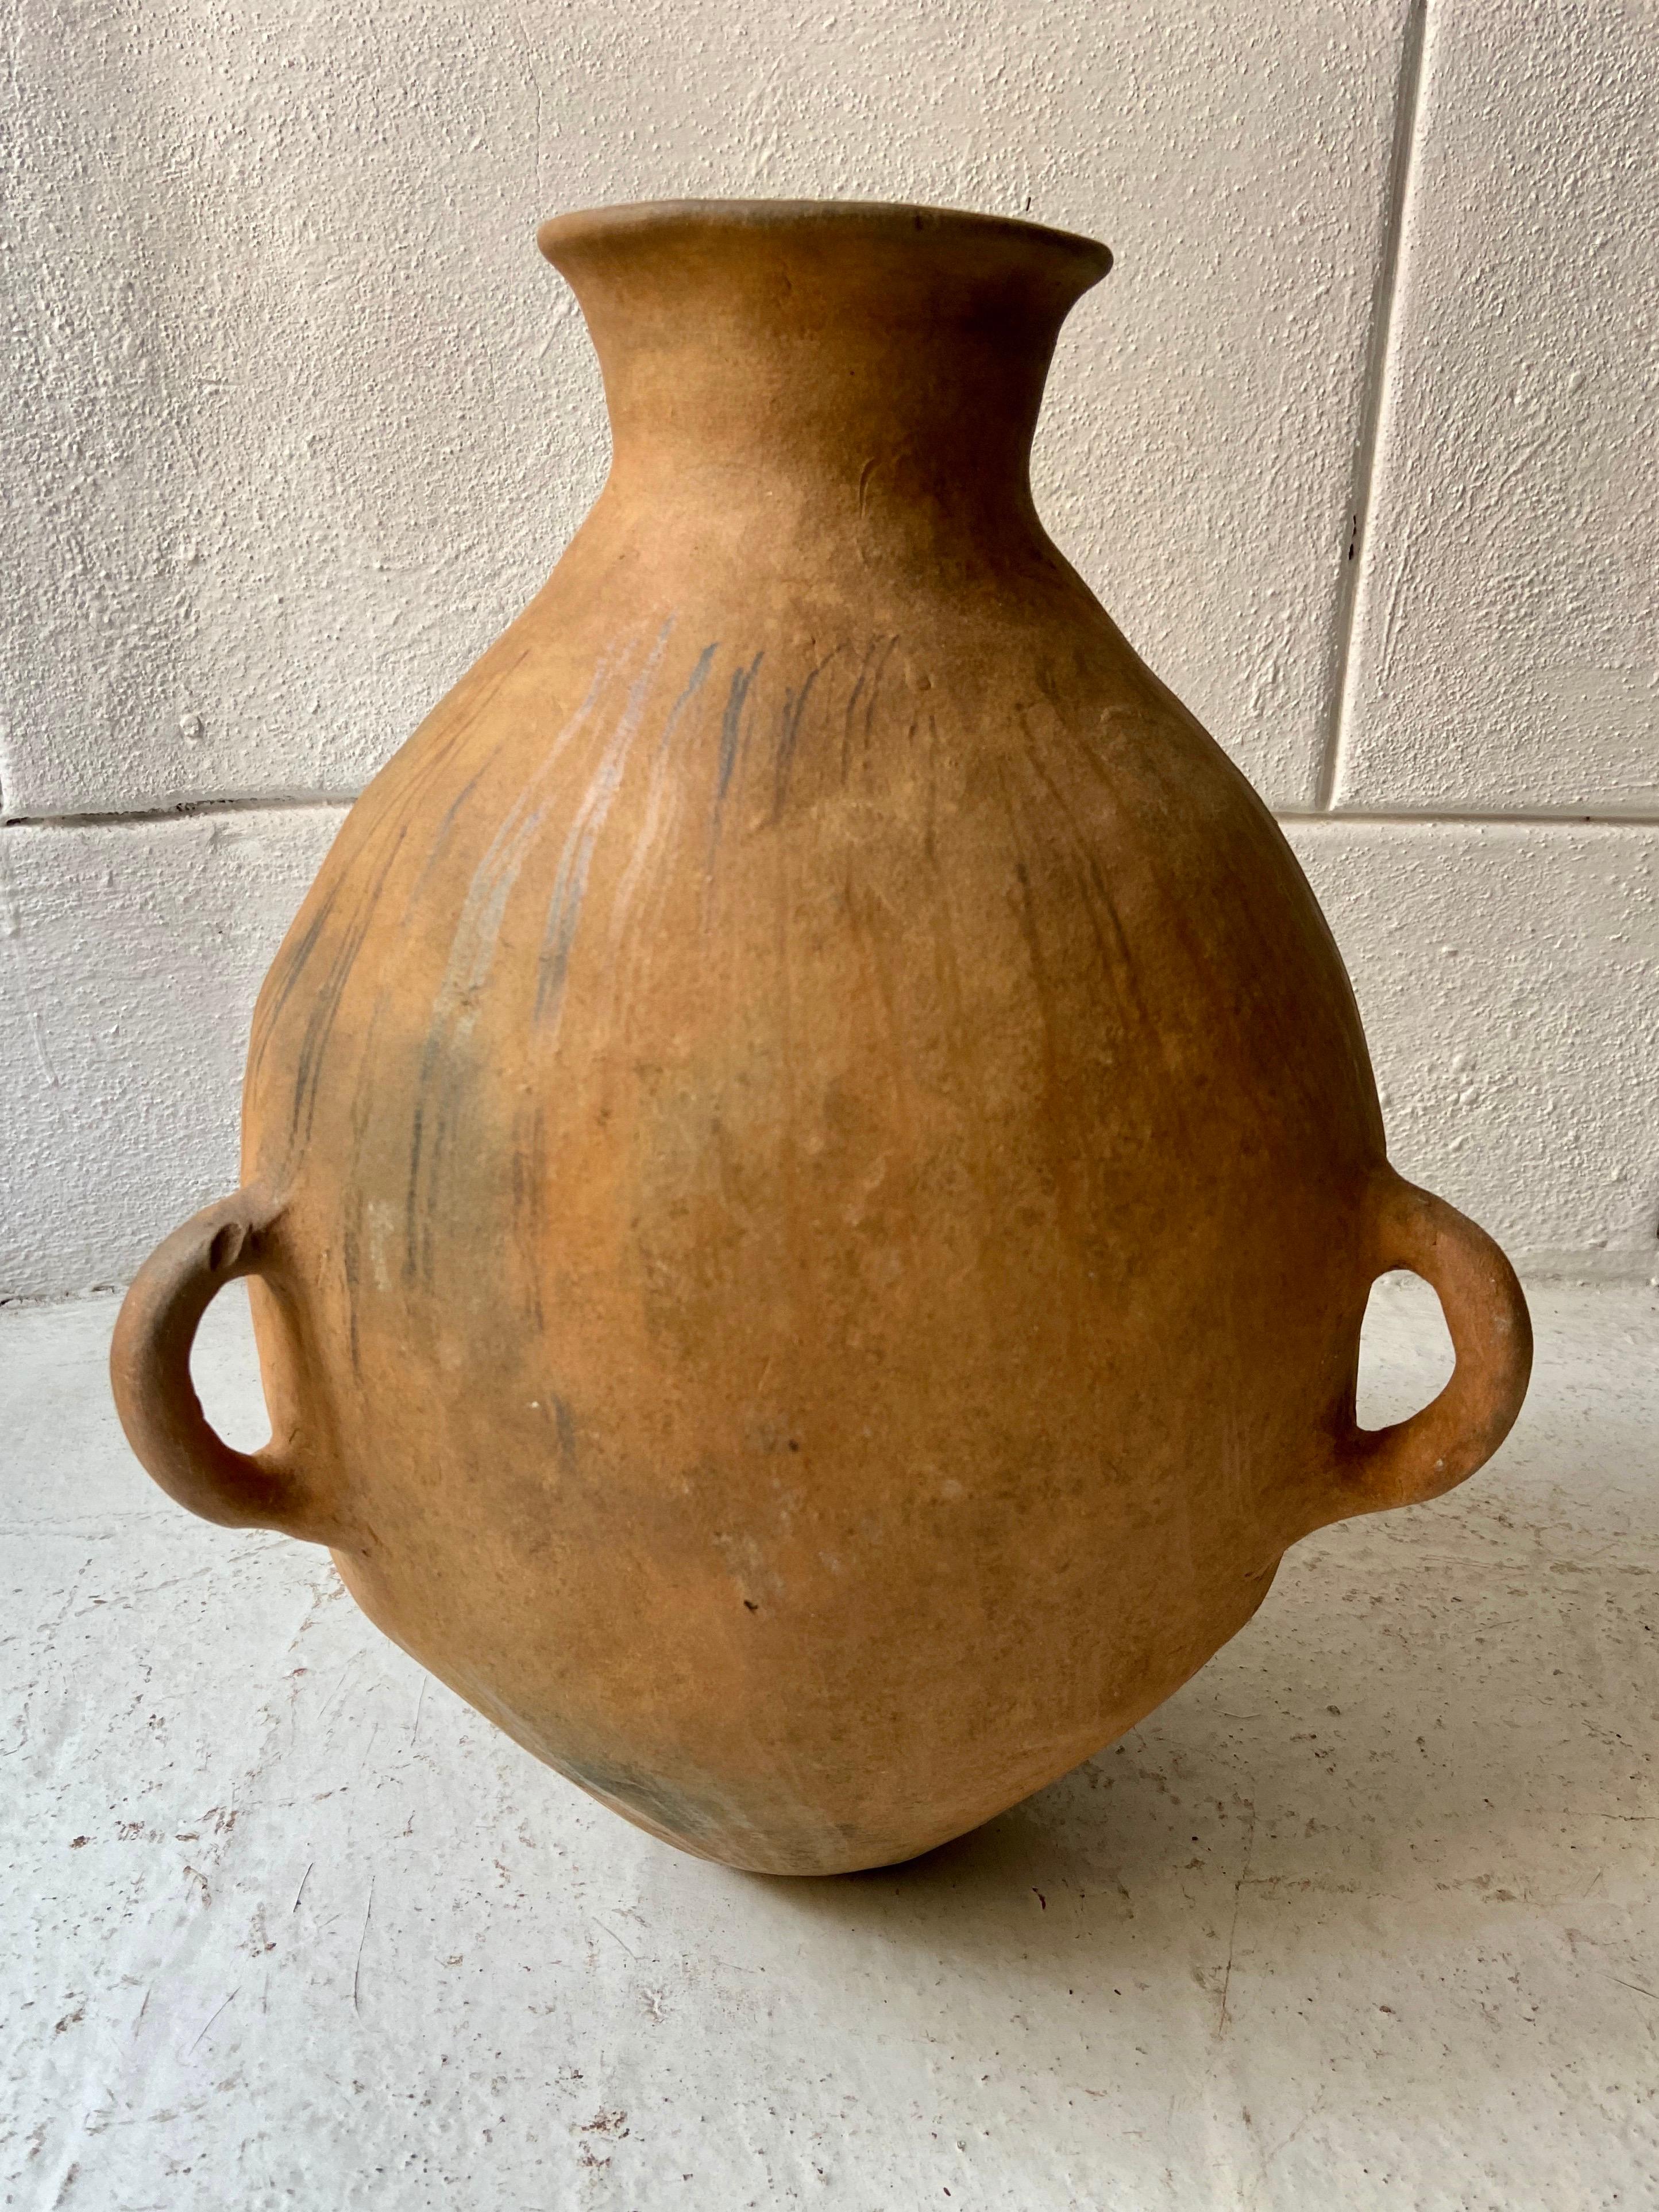 Terracotta three-rung, cone formed water vessel from the Tonalixco municipality in Puebla, Mexico, circa 1950s. Pottery as an art form and a functional tool in this region is nearly extinct.